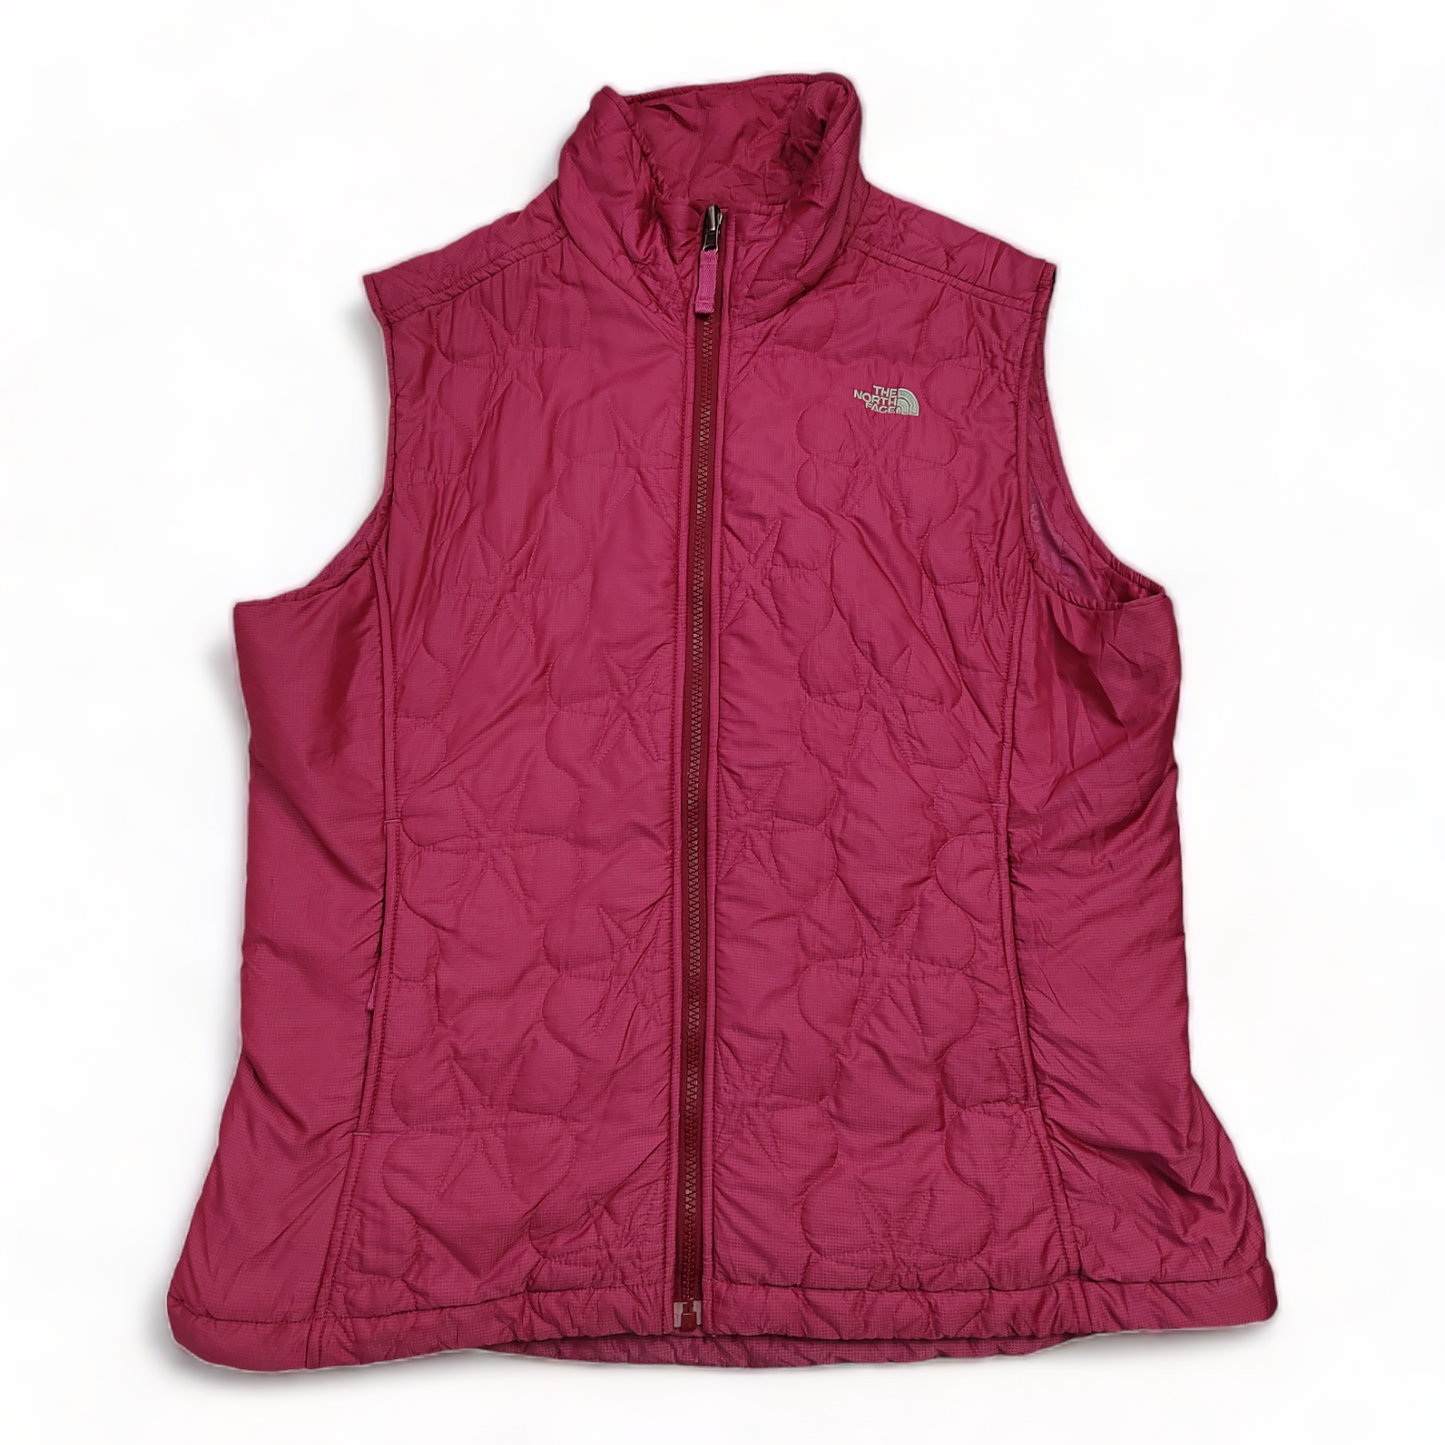 The North Face Bodywarmer Women’s Large Pink Zip Up Thermal